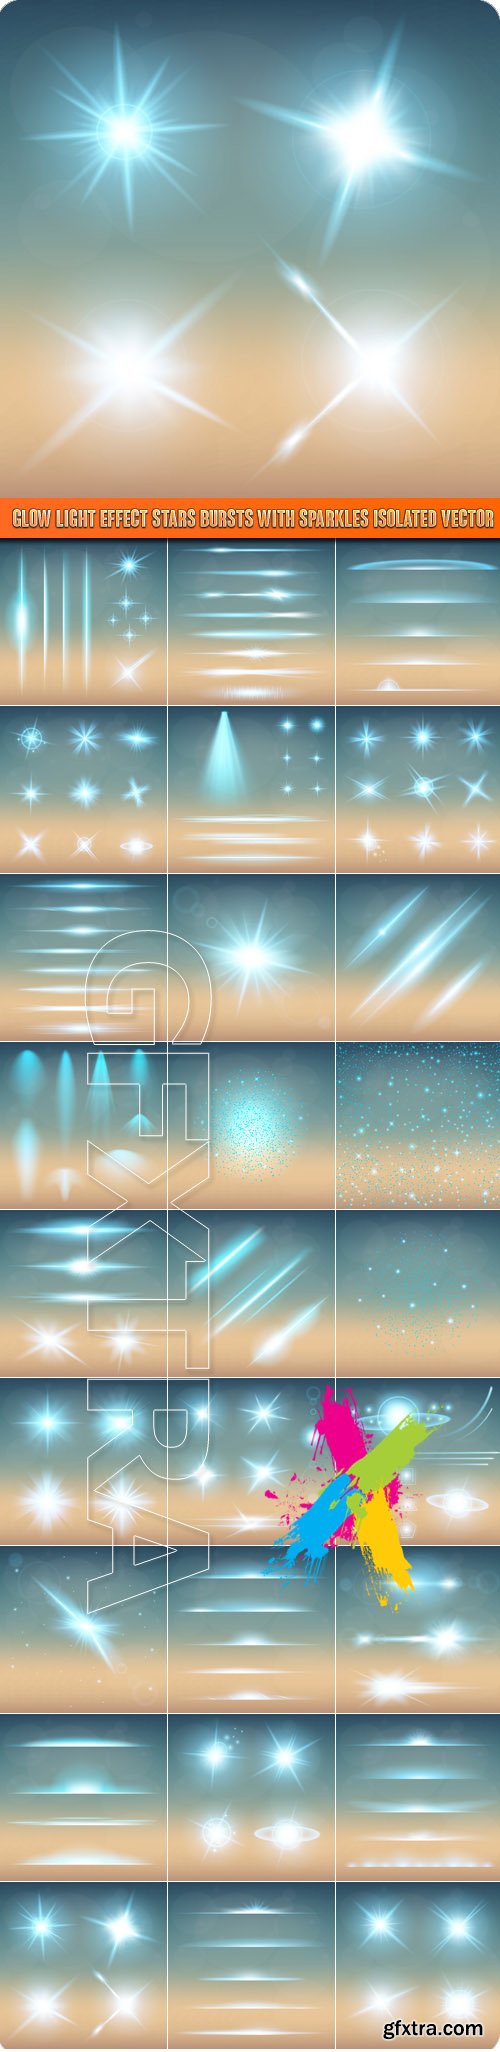 Glow light effect stars bursts with sparkles isolated vector